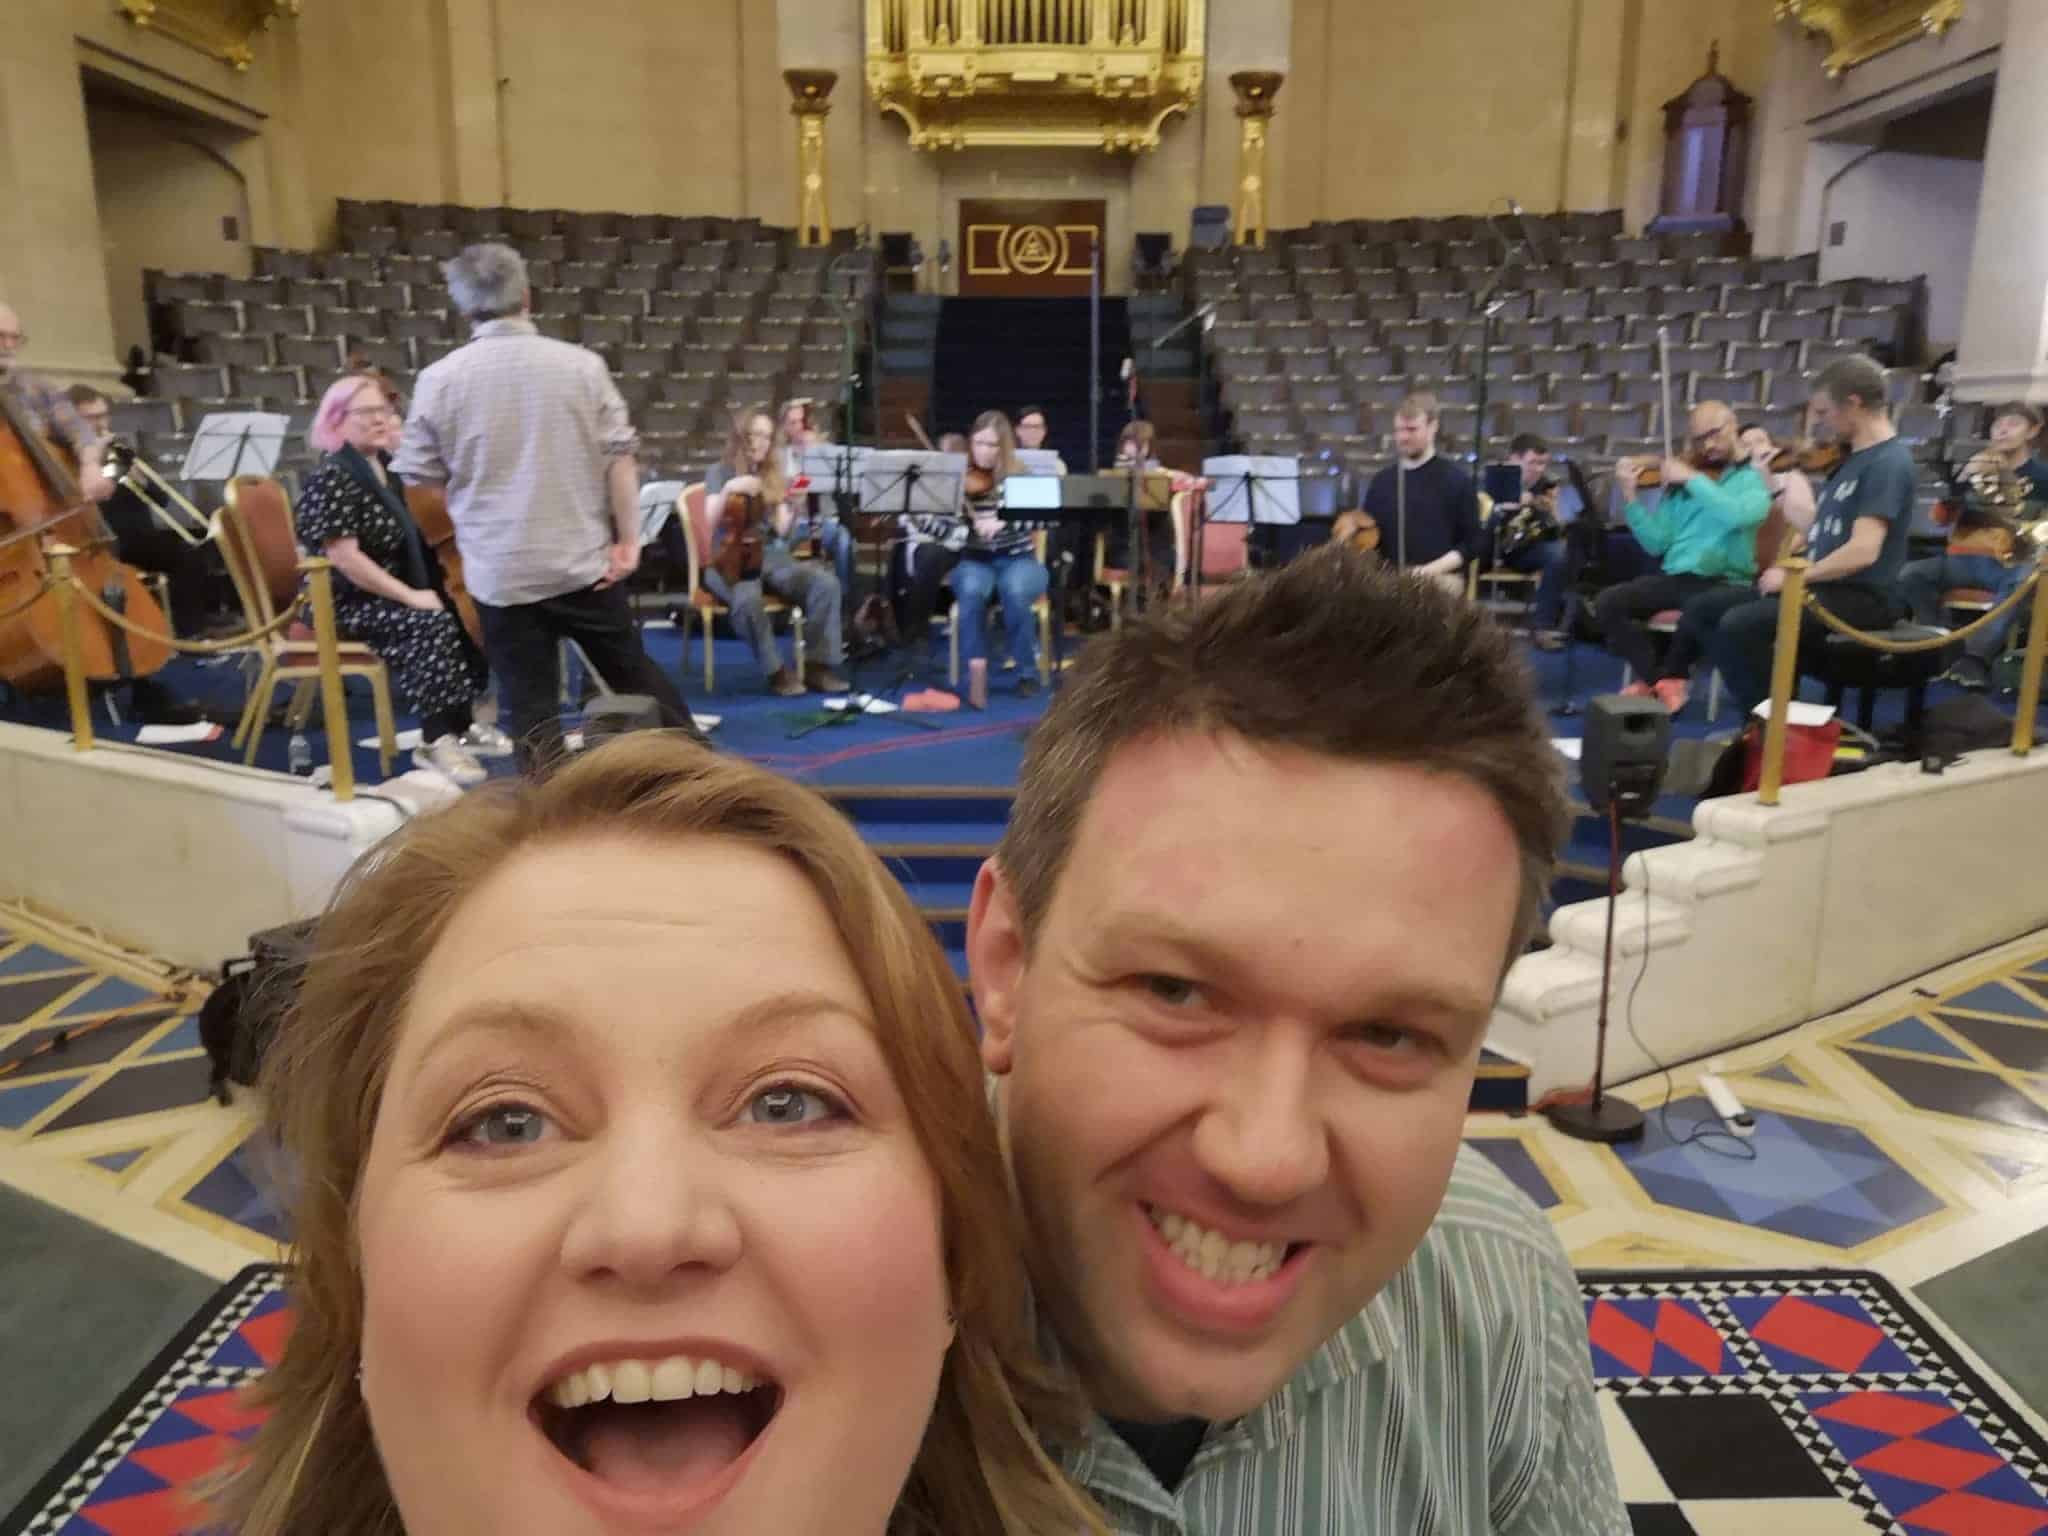 Catharine and Ben Woodward in front of Regents Opera Ensemble in The Grand Temple, Freemasons‘ Hall